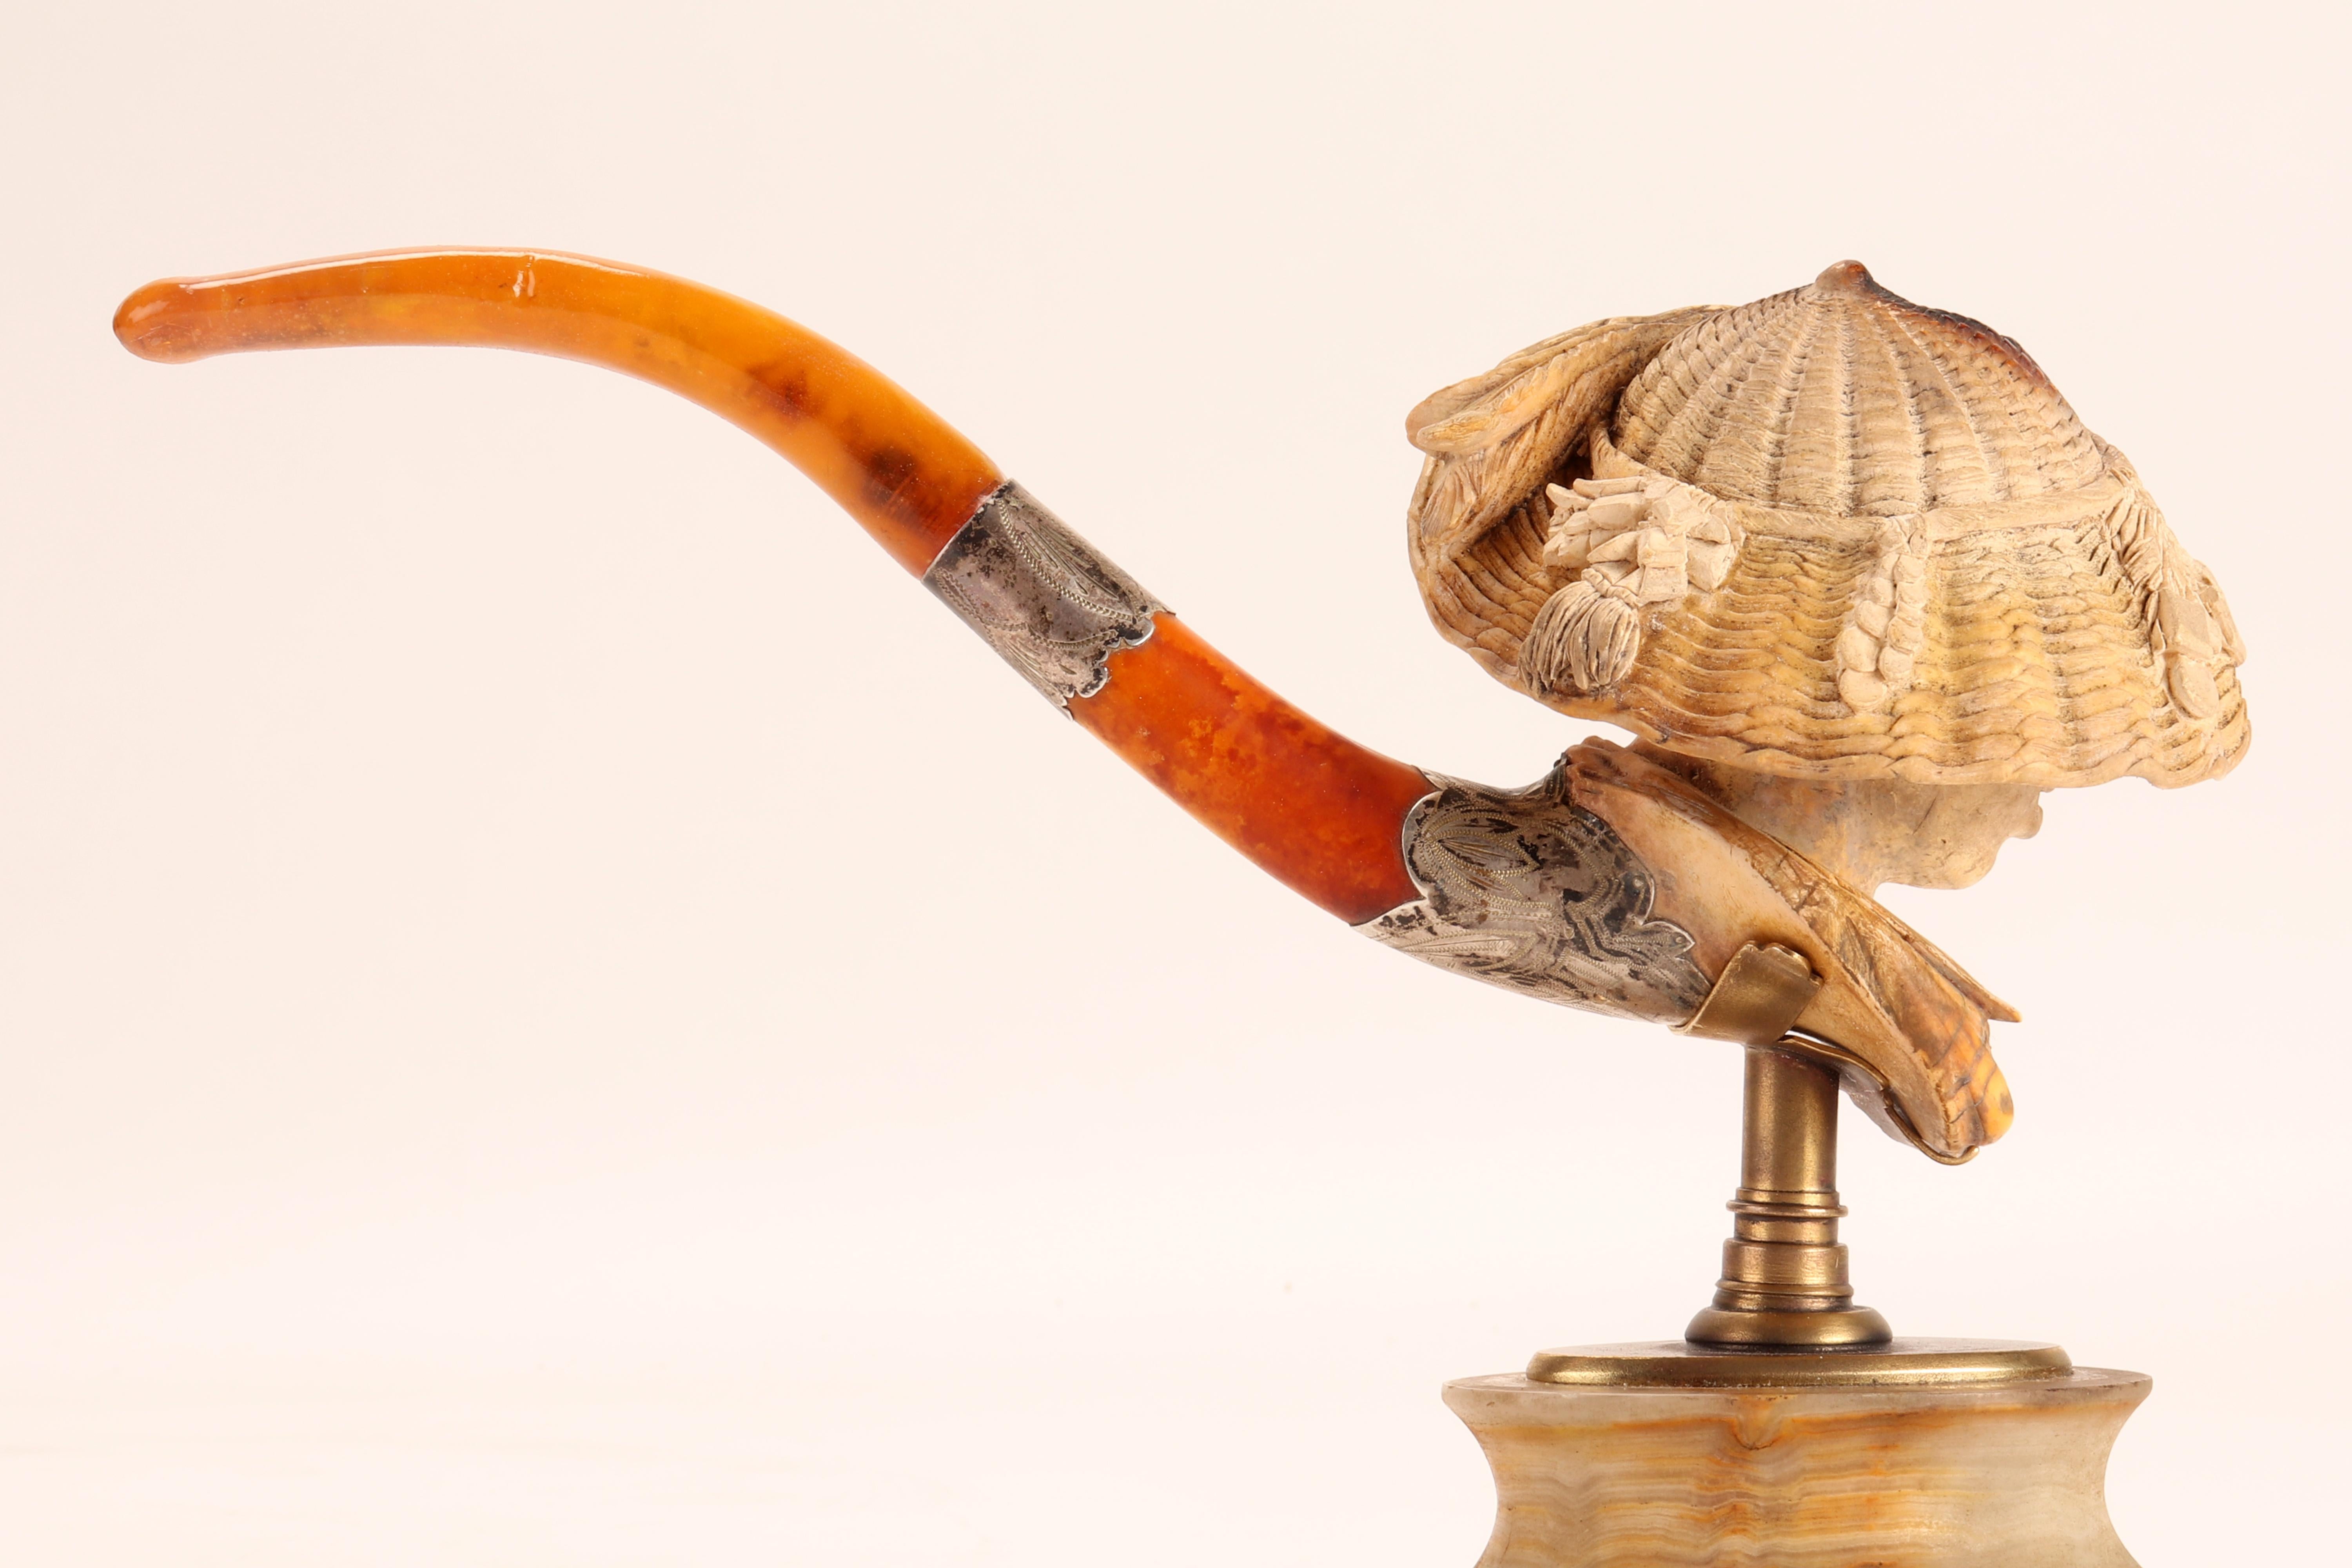 Carved meershaum pipe, with amber mouthpiece and nielloed silver band. In the large bowl of the pipe, the head of an African American woman with hearing is depicted, with a wide straw hat with bows. Original case. Vienna, Austria circa 1880. (The